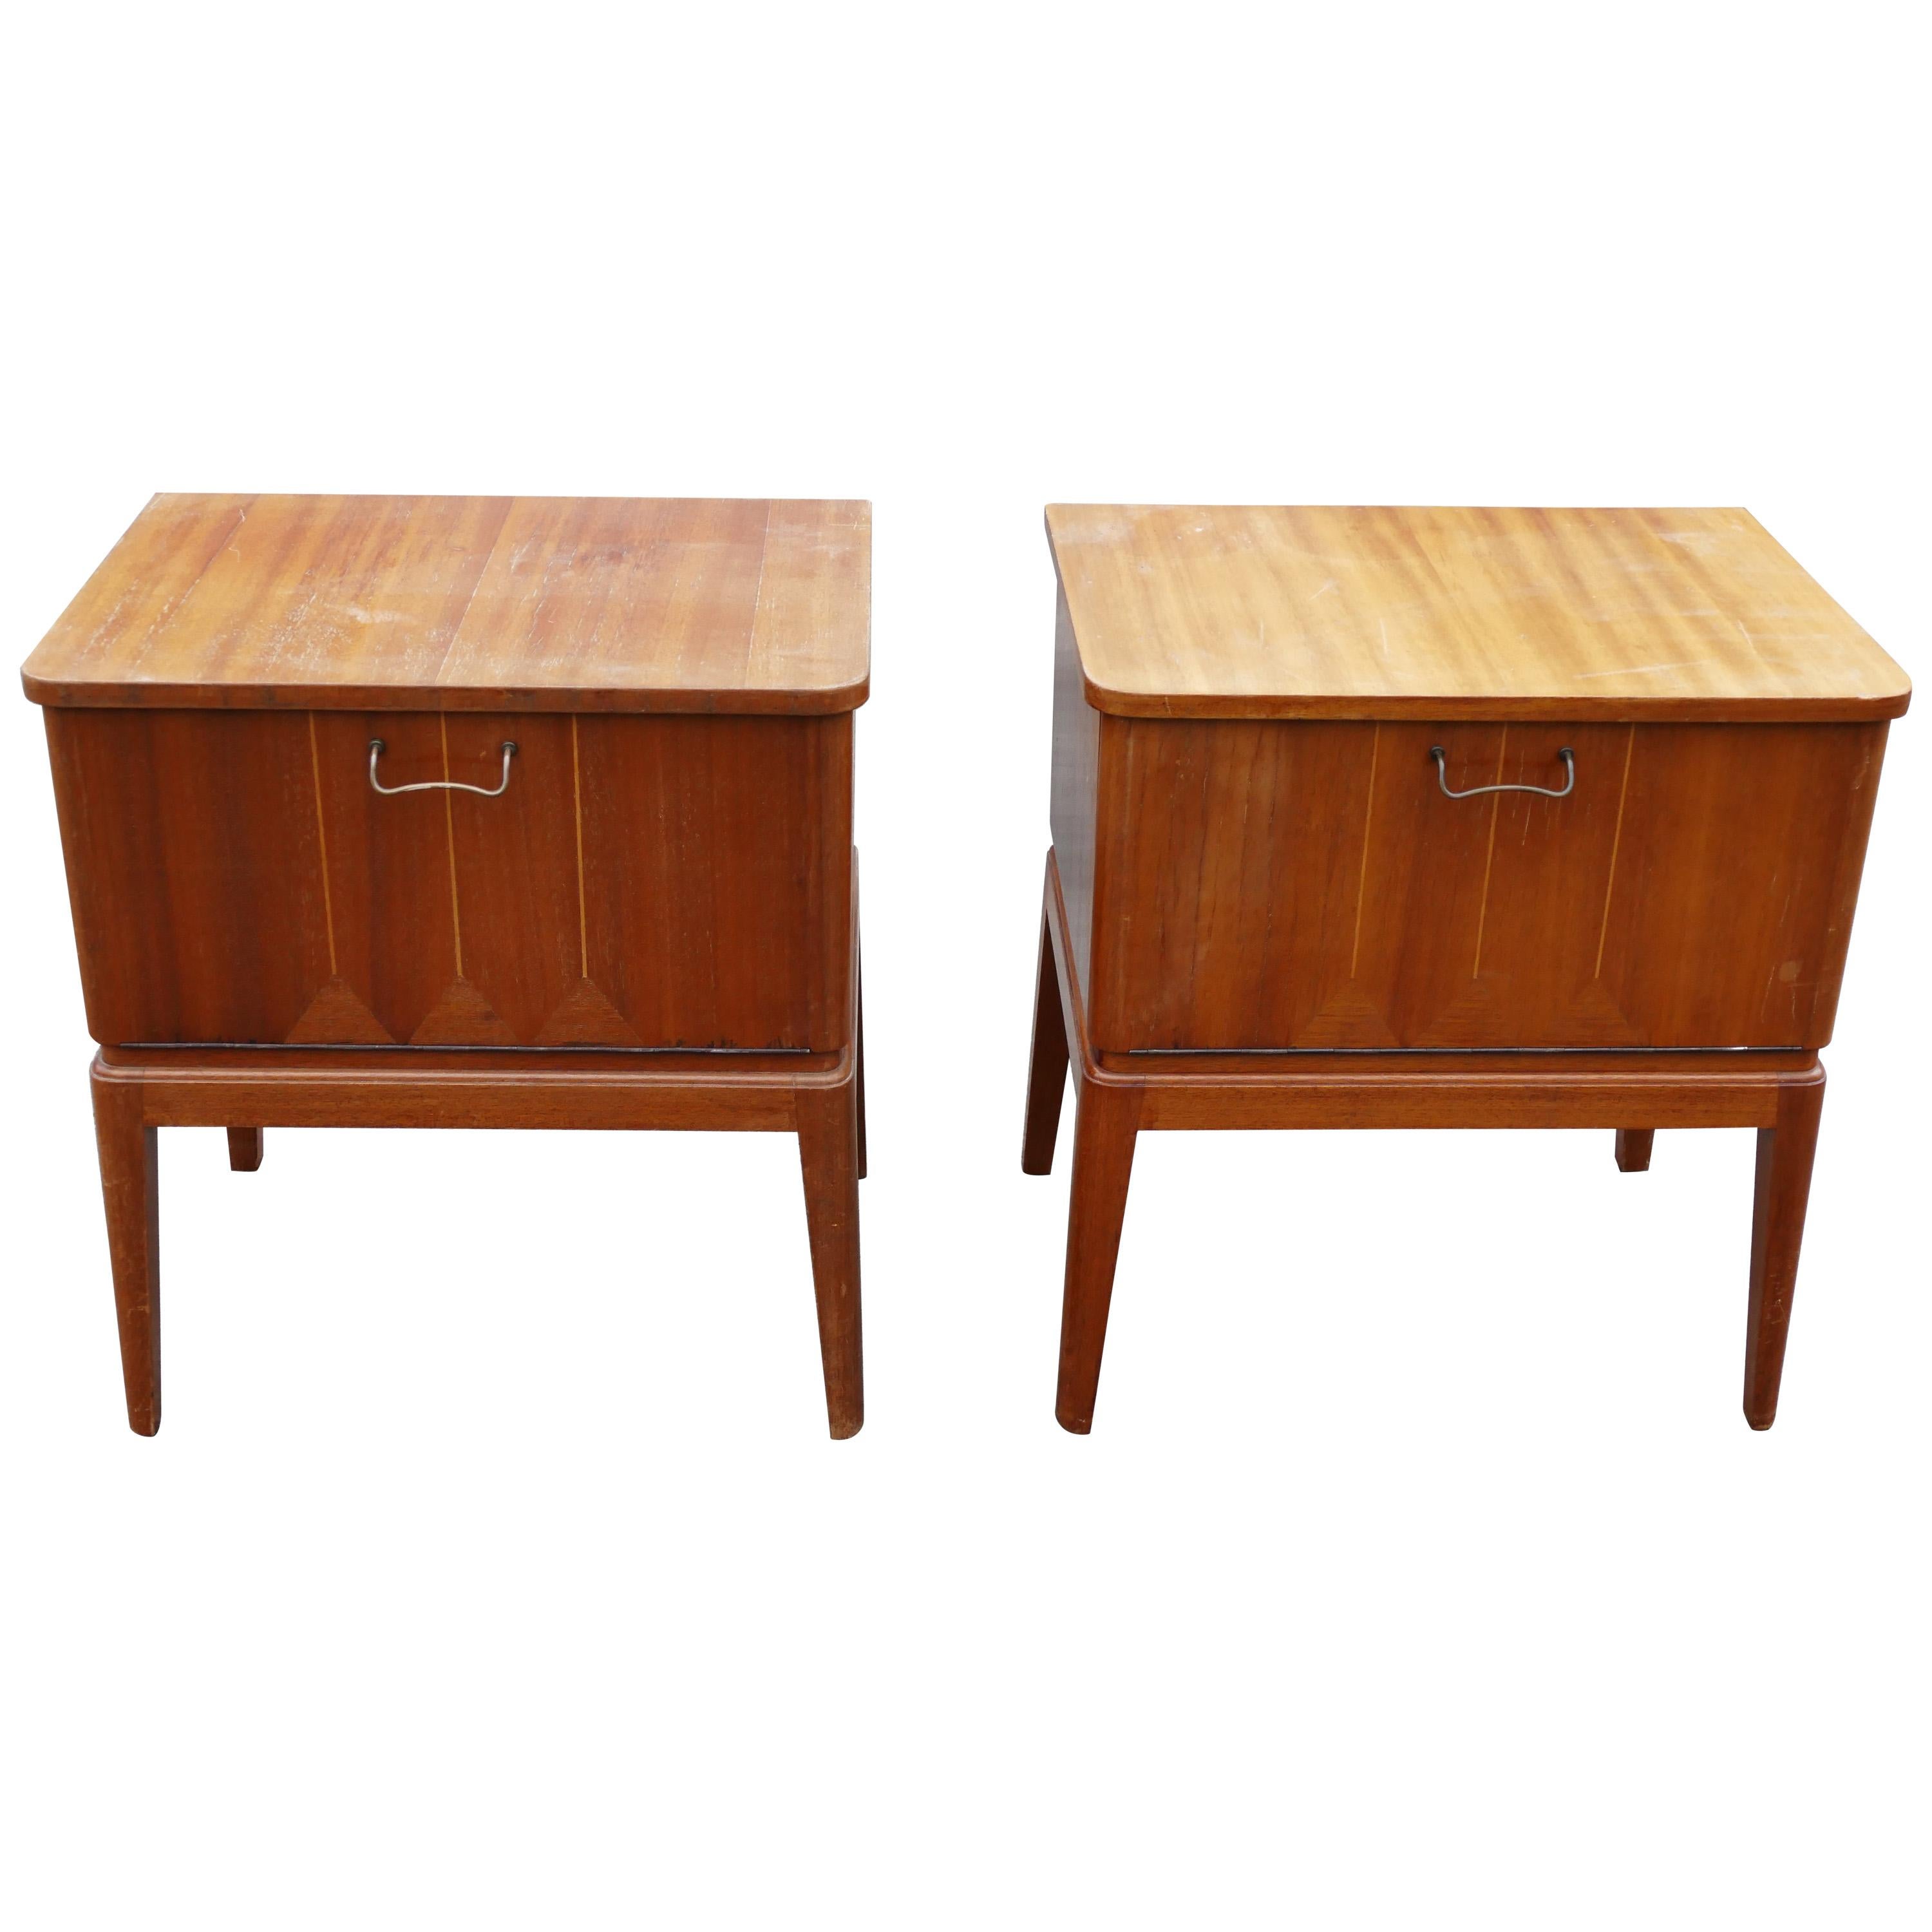 Set of Rare Danish Nightstands from 1930s For Sale